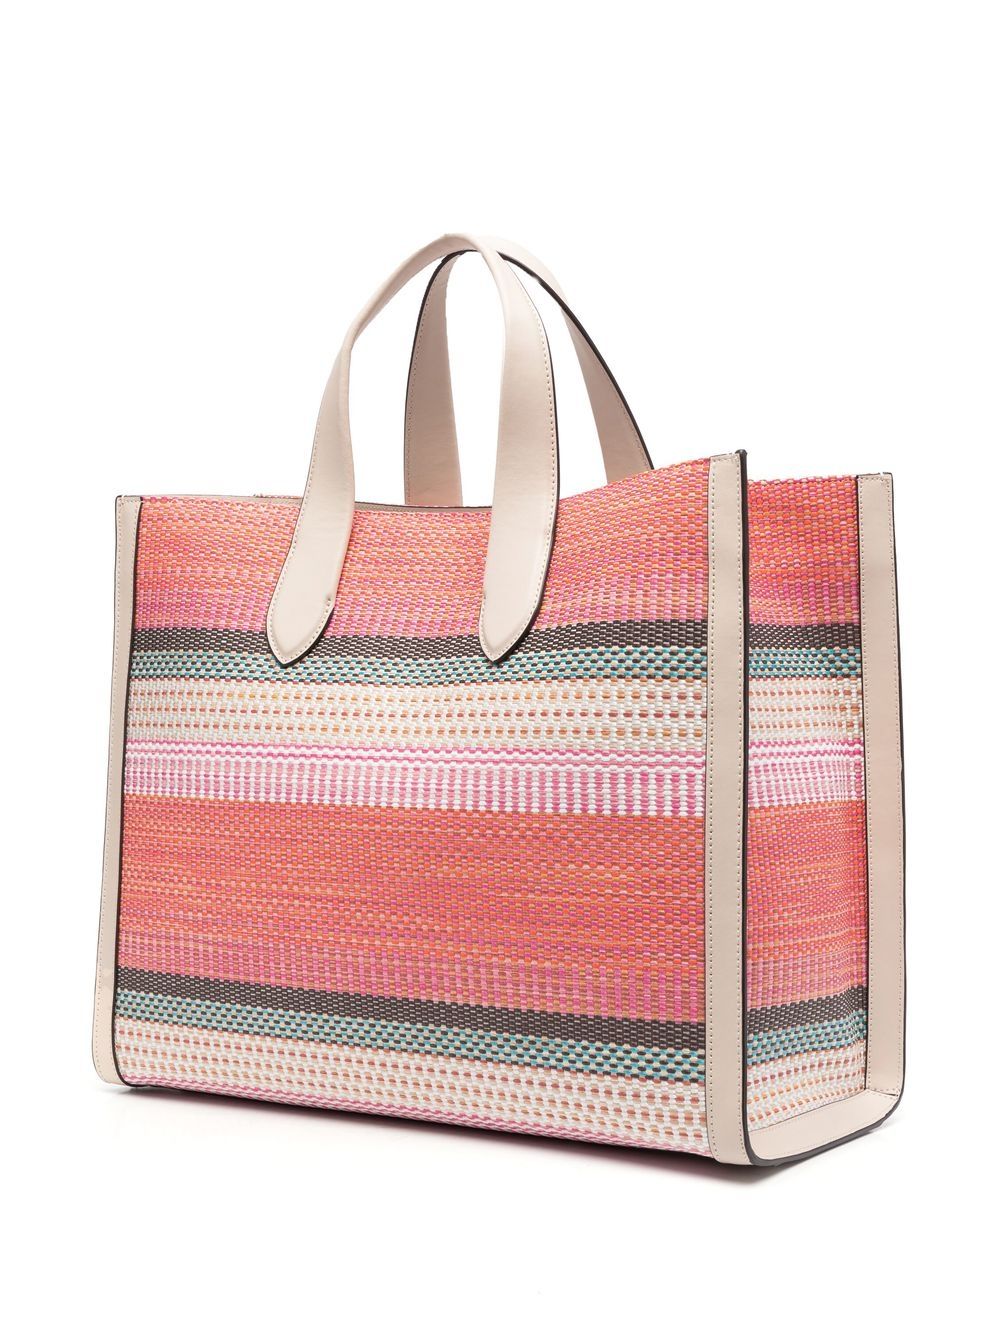 Kate Spade New York Tote Bags  Manhattan Striped Small Tote